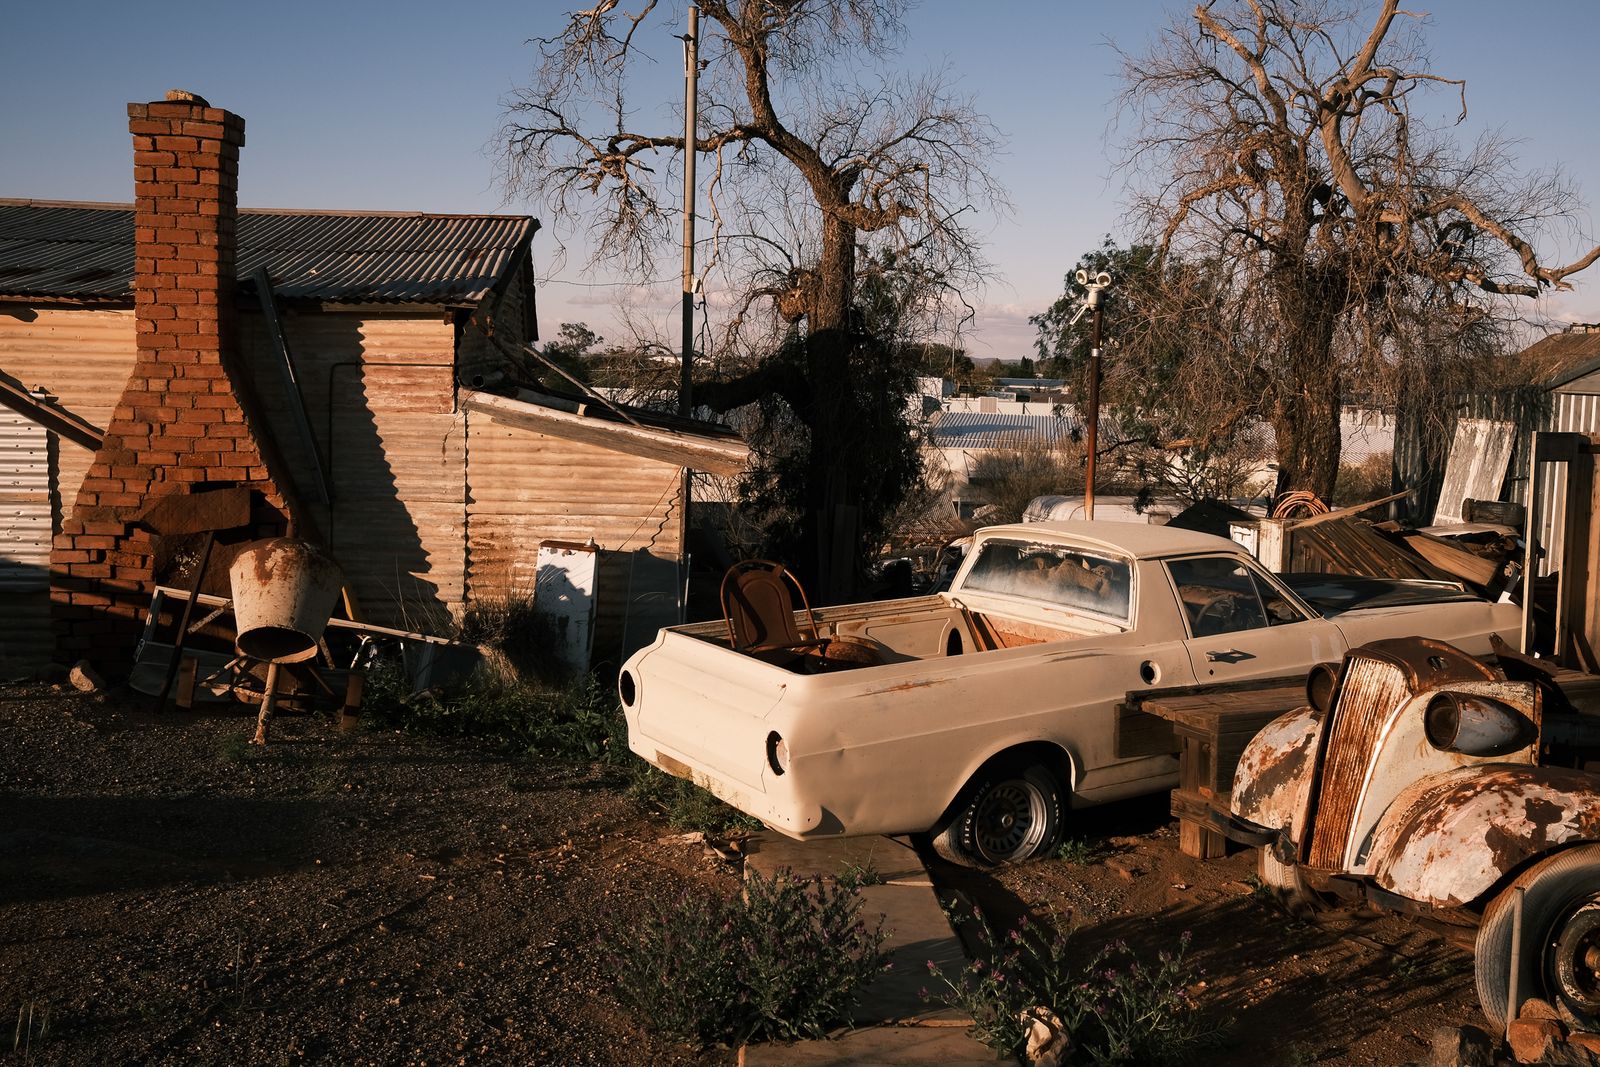 © Drew Hopper - Image from the West Of Somewhere East photography project